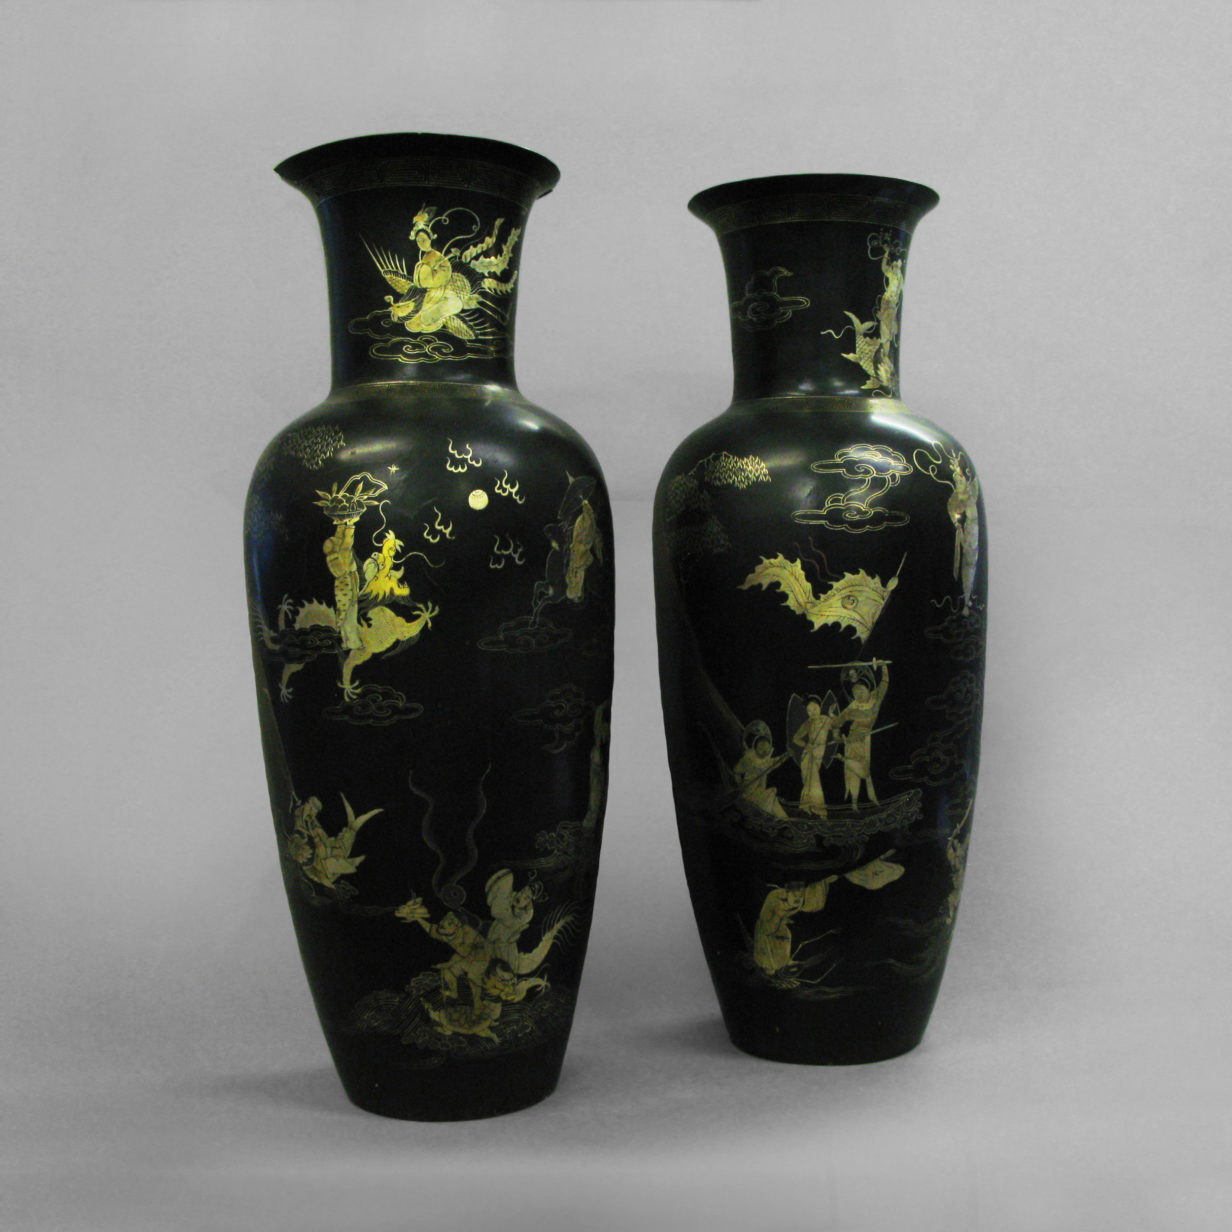 A pair of large lacquer vases